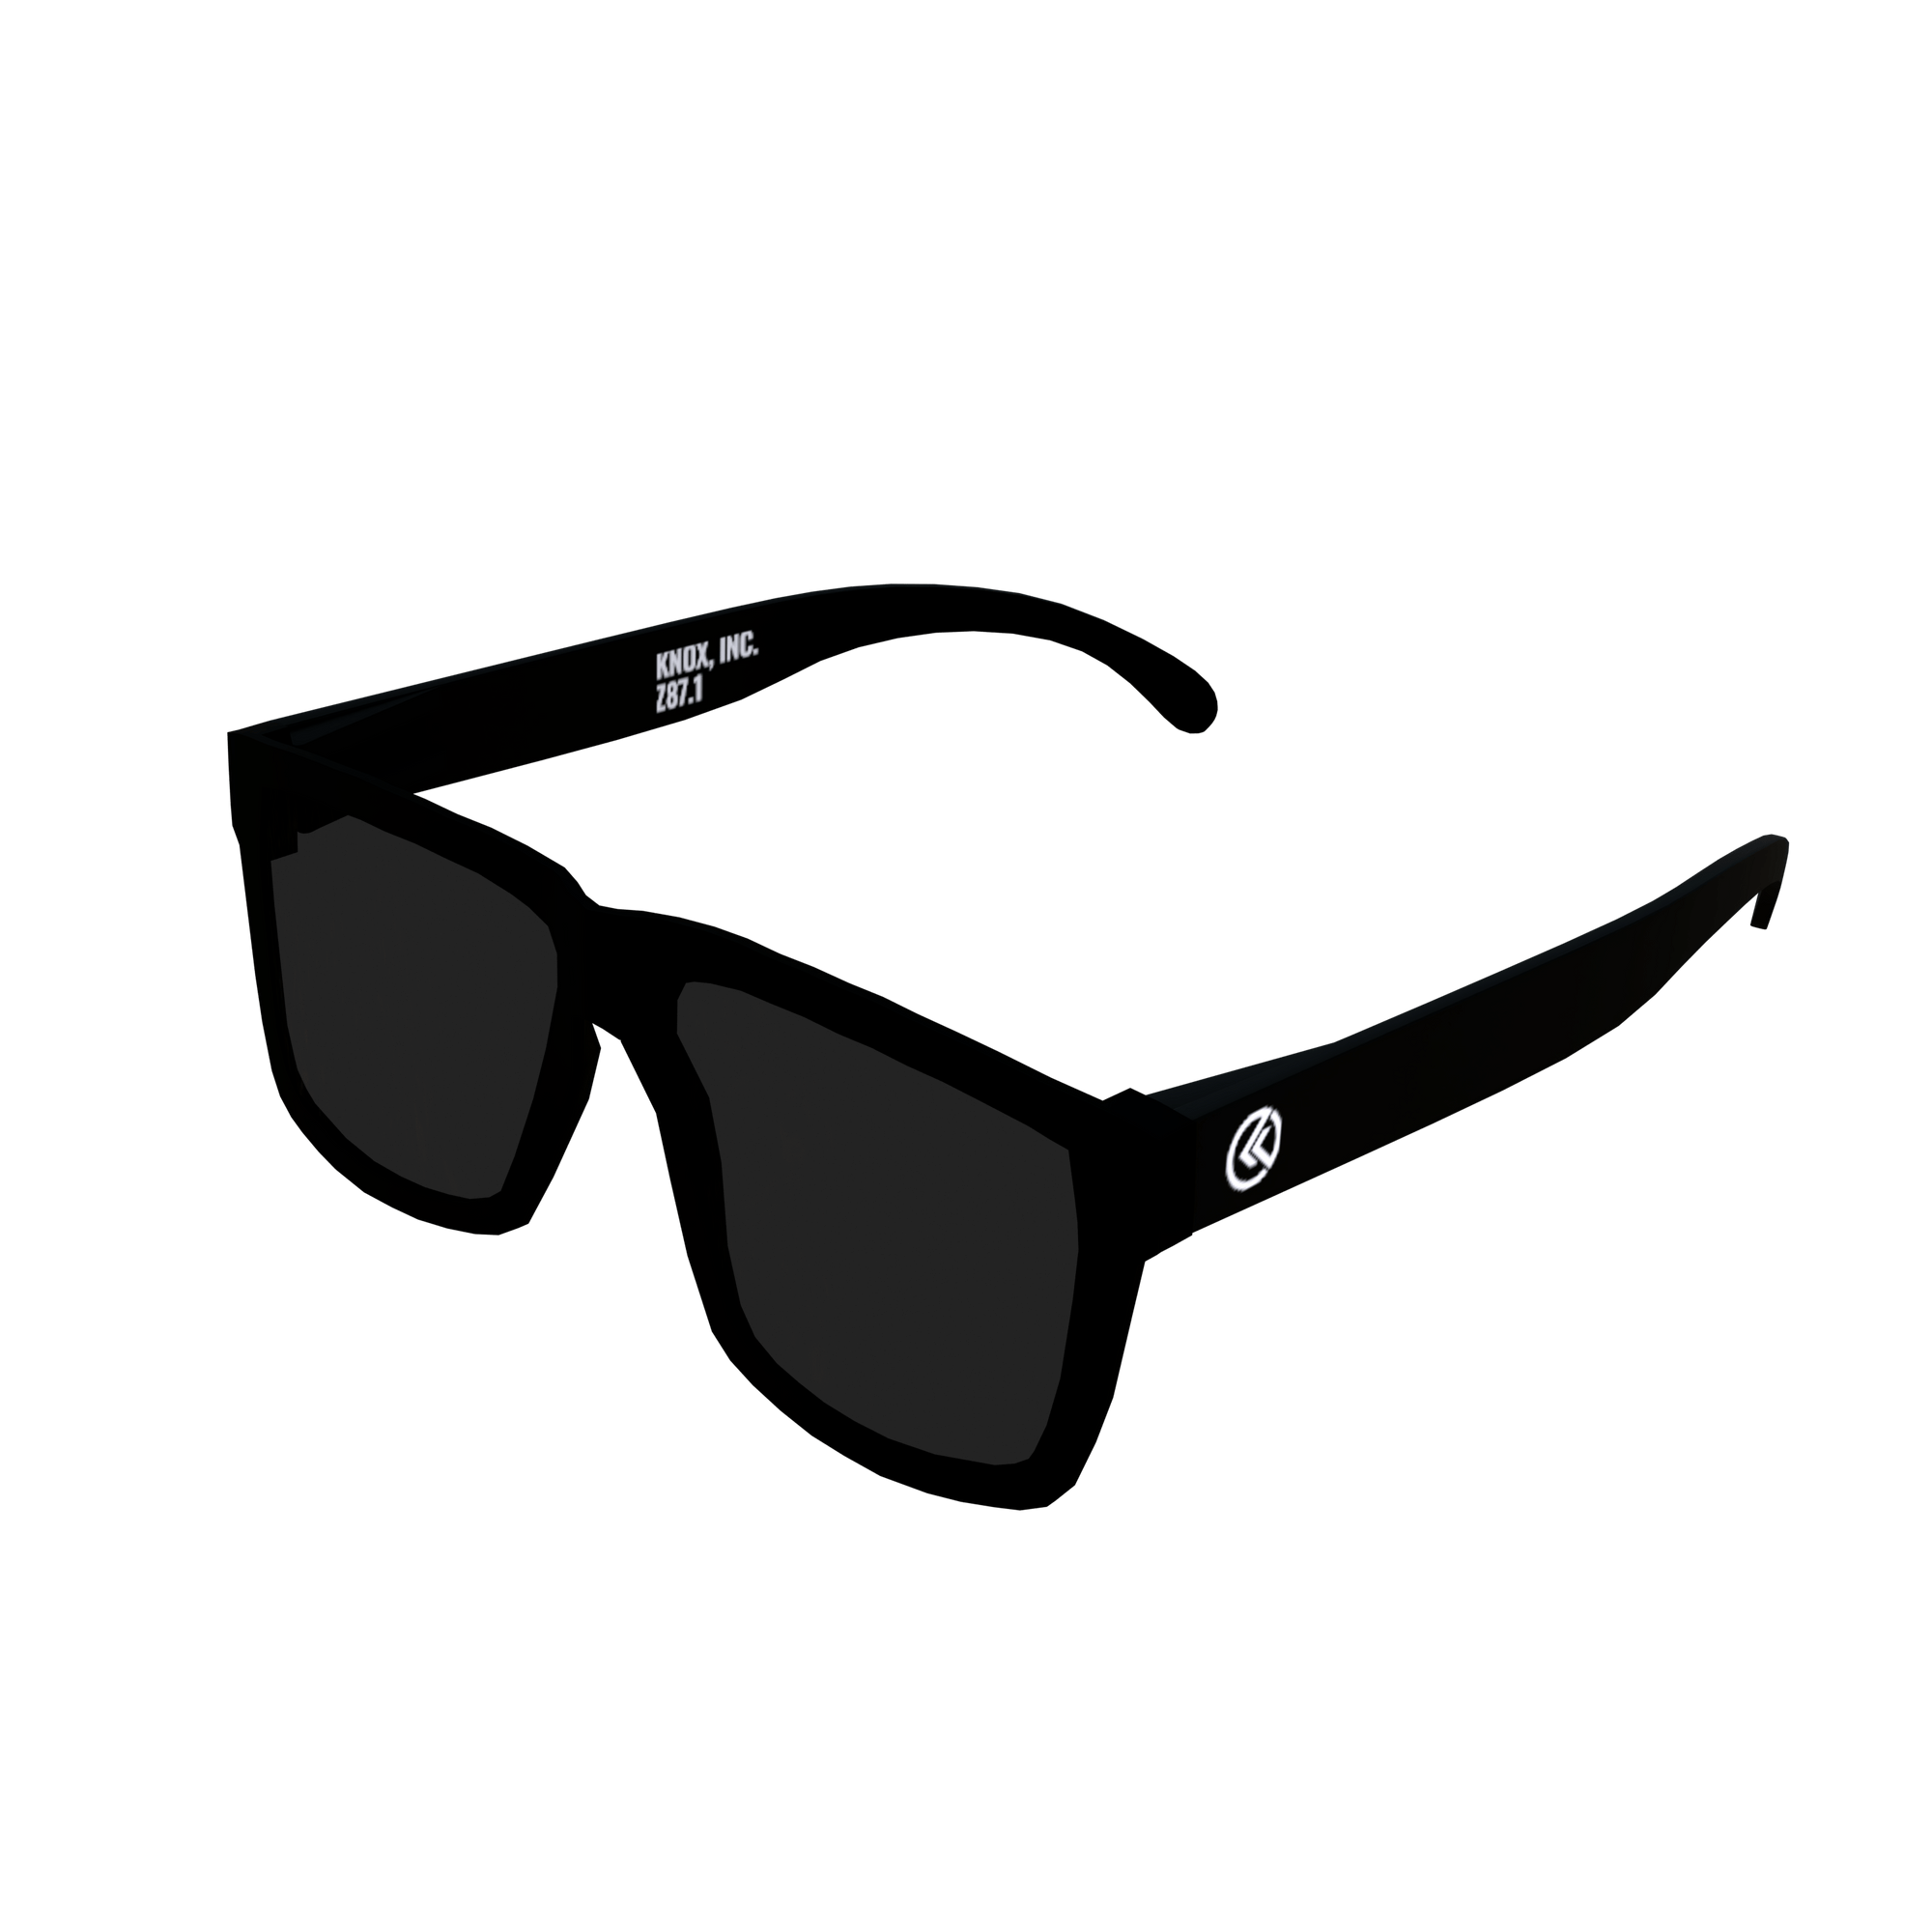 Knox Incorporated Apparel & Accessories The Badger Z87 Sunglasses - Black